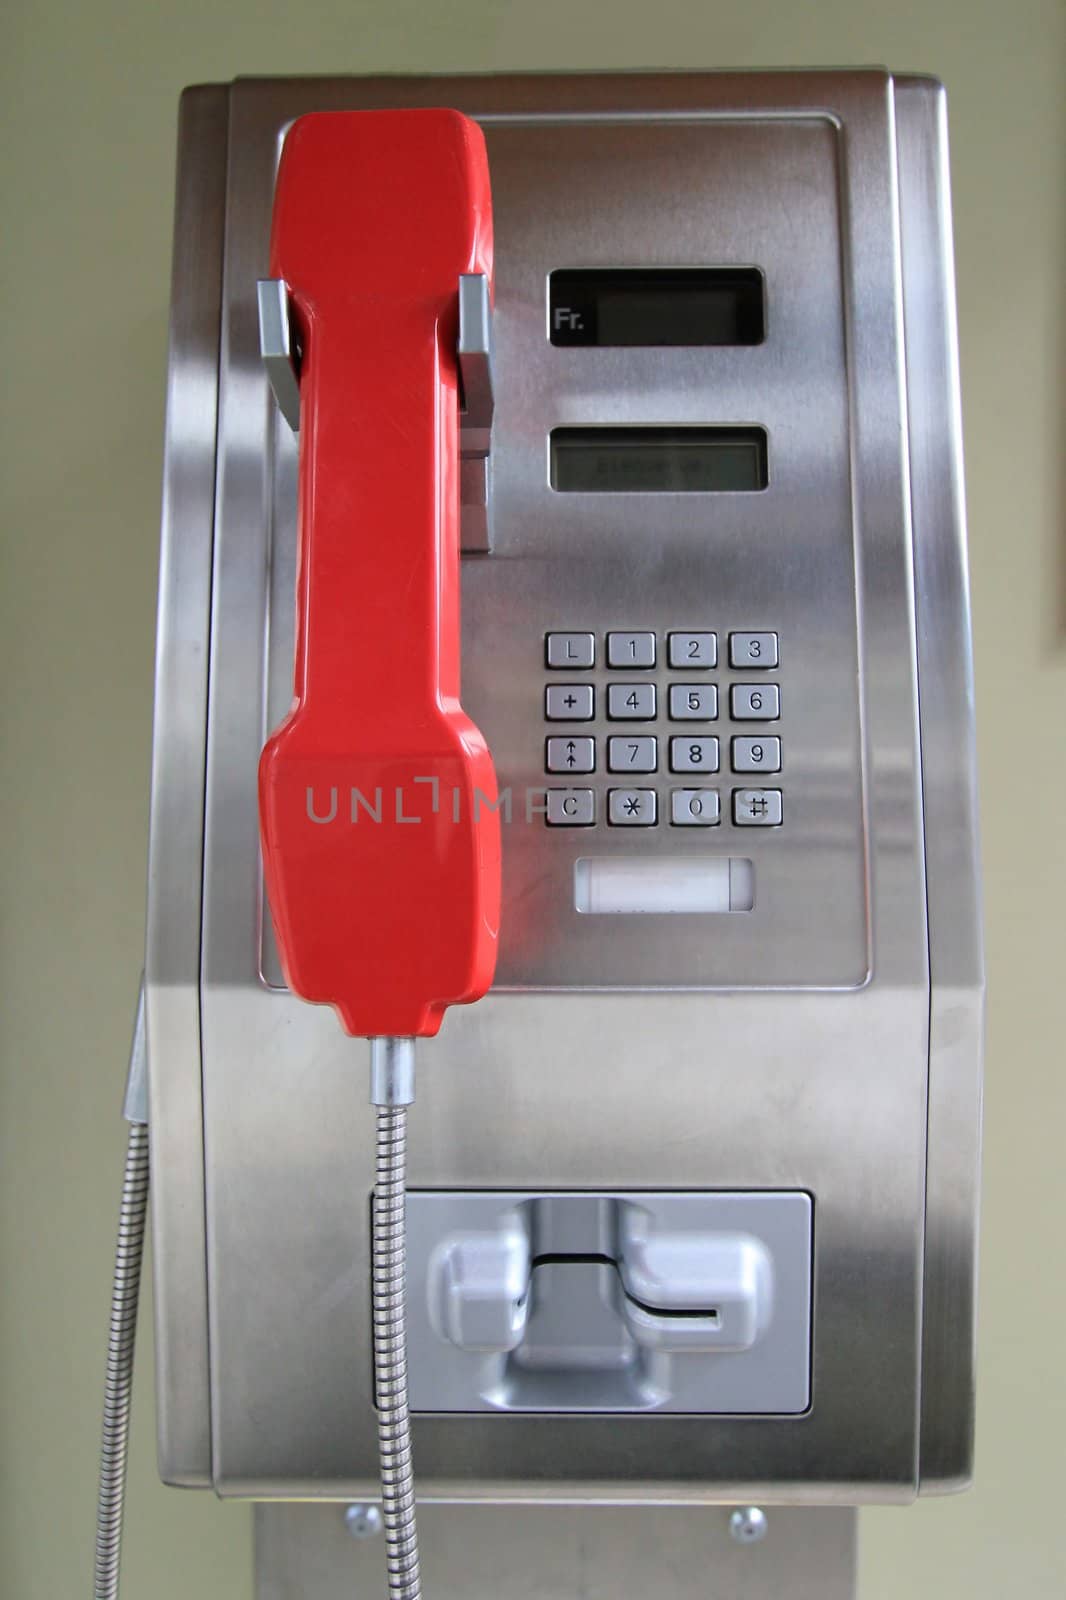 Close up of a grey and red public phone